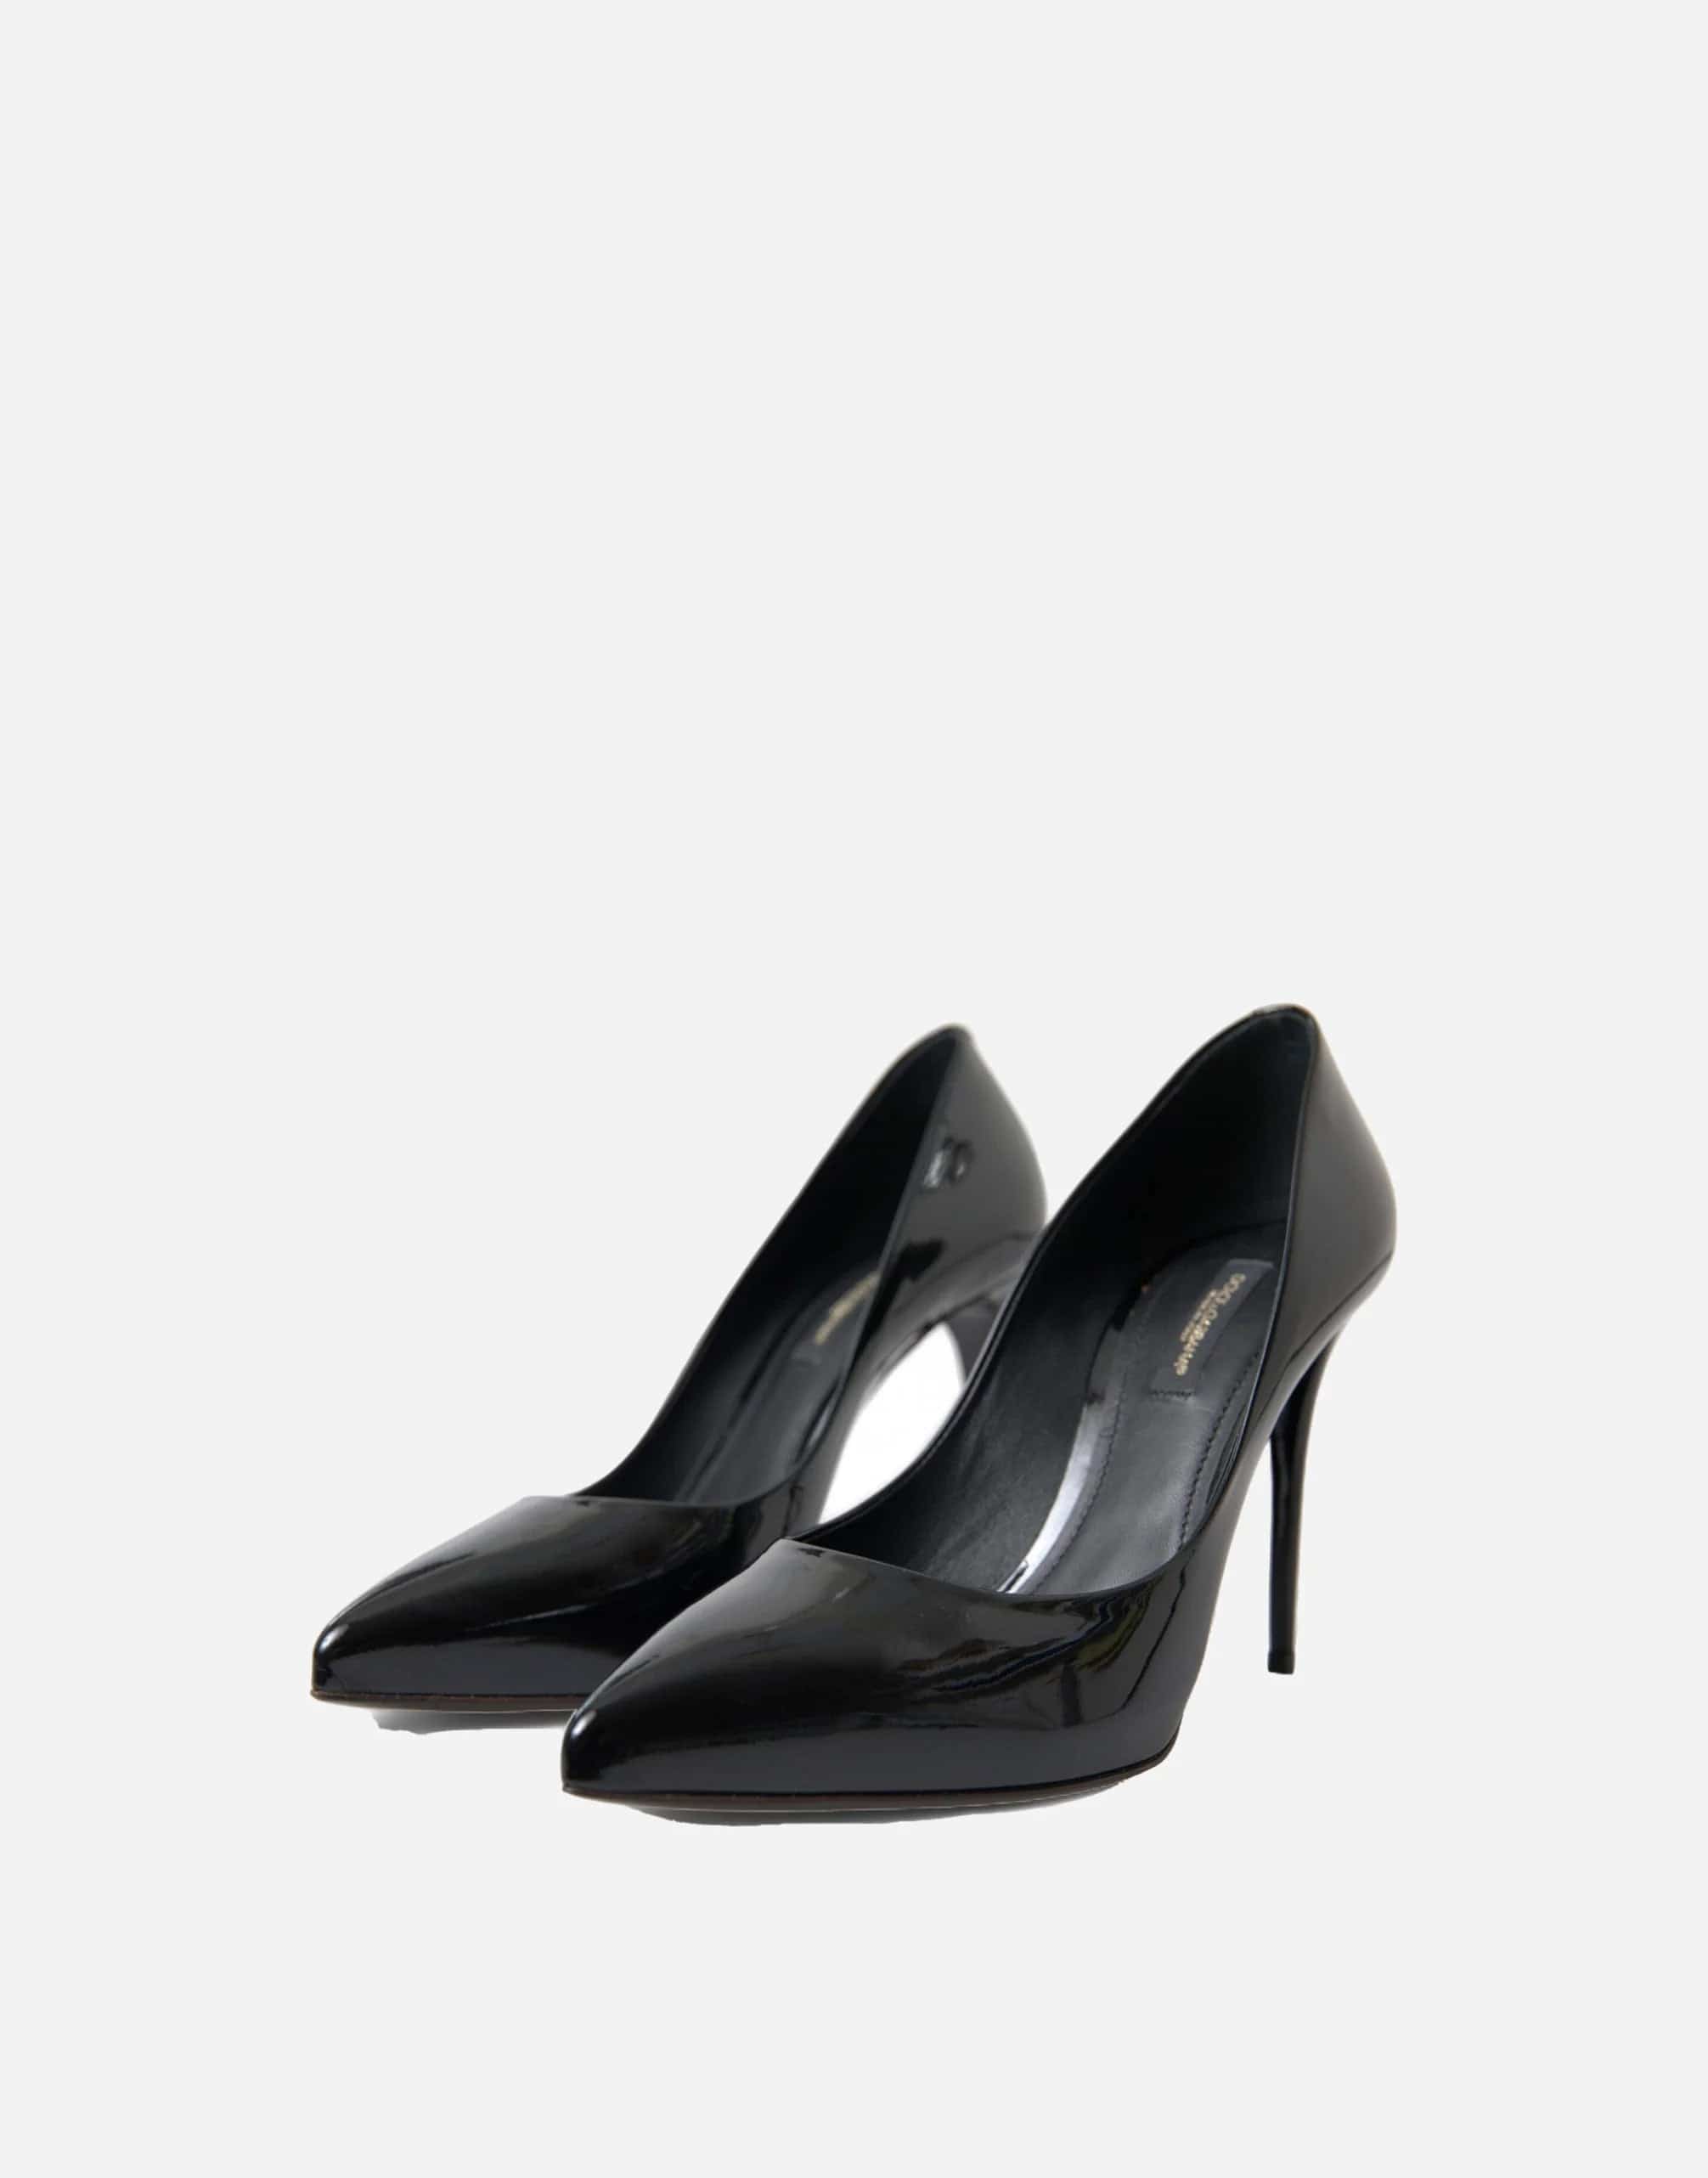 Pumps With Patent Leather